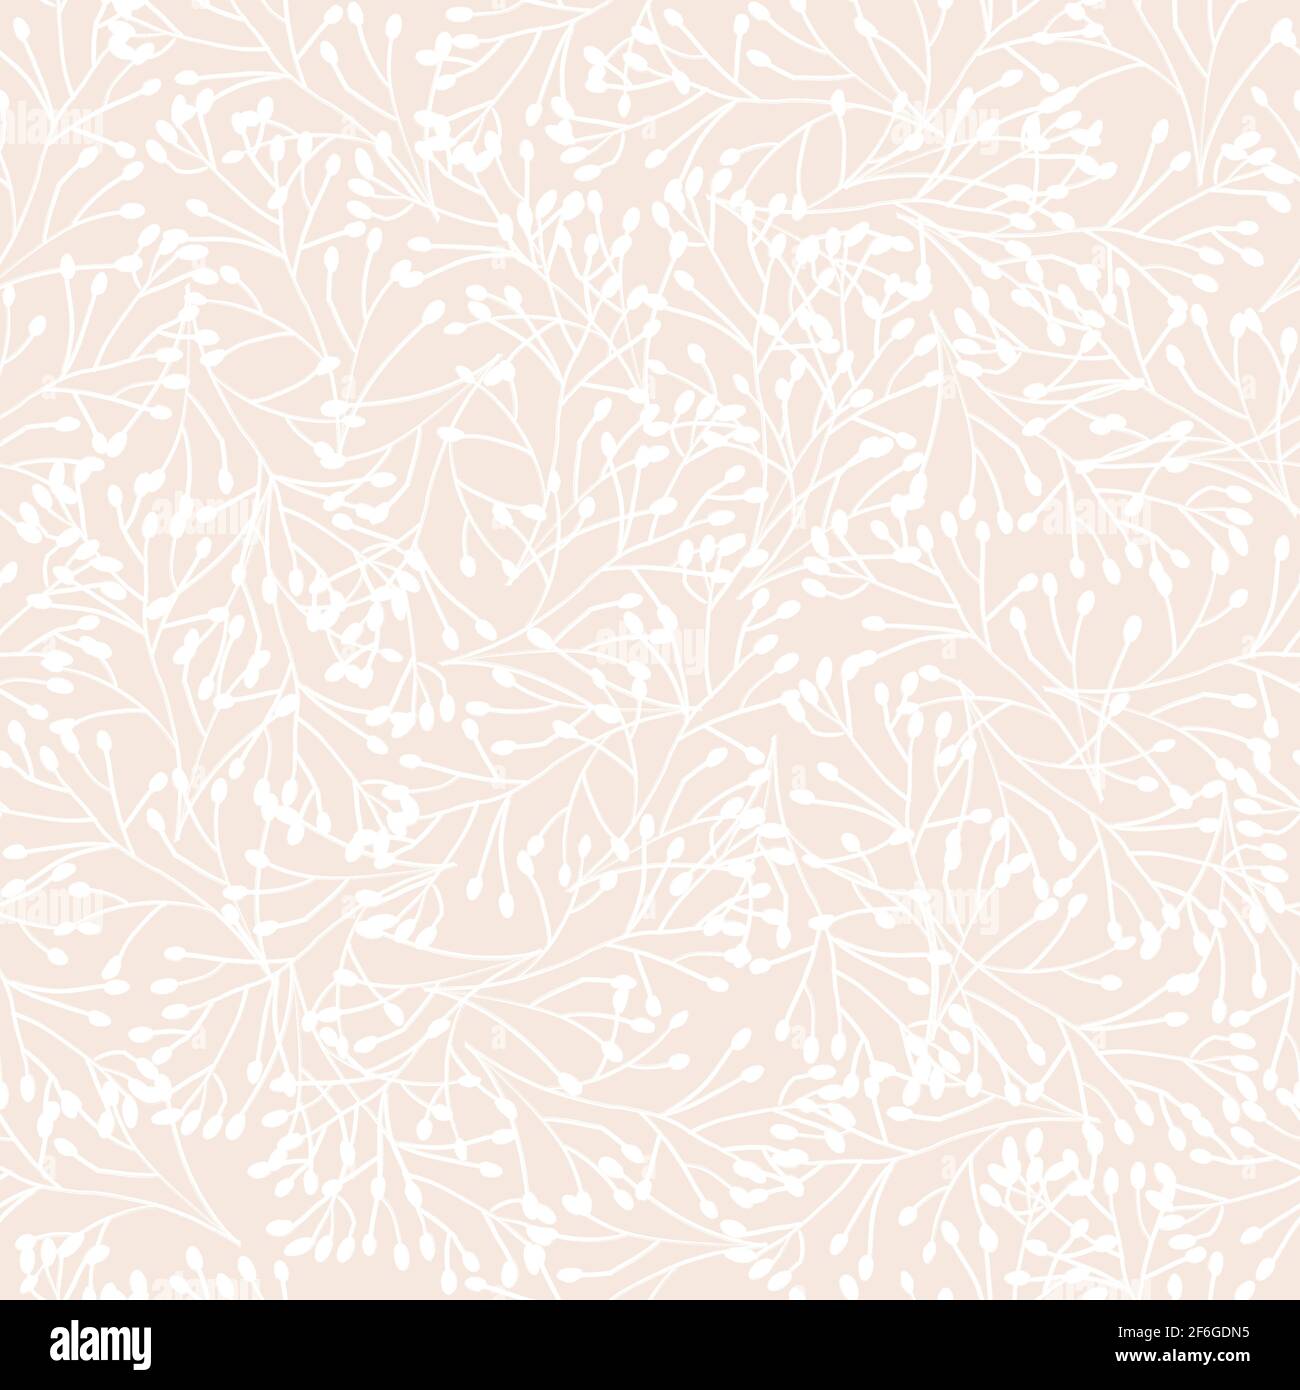 Brown Beige Seamless Fabric Texture Pattern Stock Vector - Illustration of  indoors, picnic: 50760013